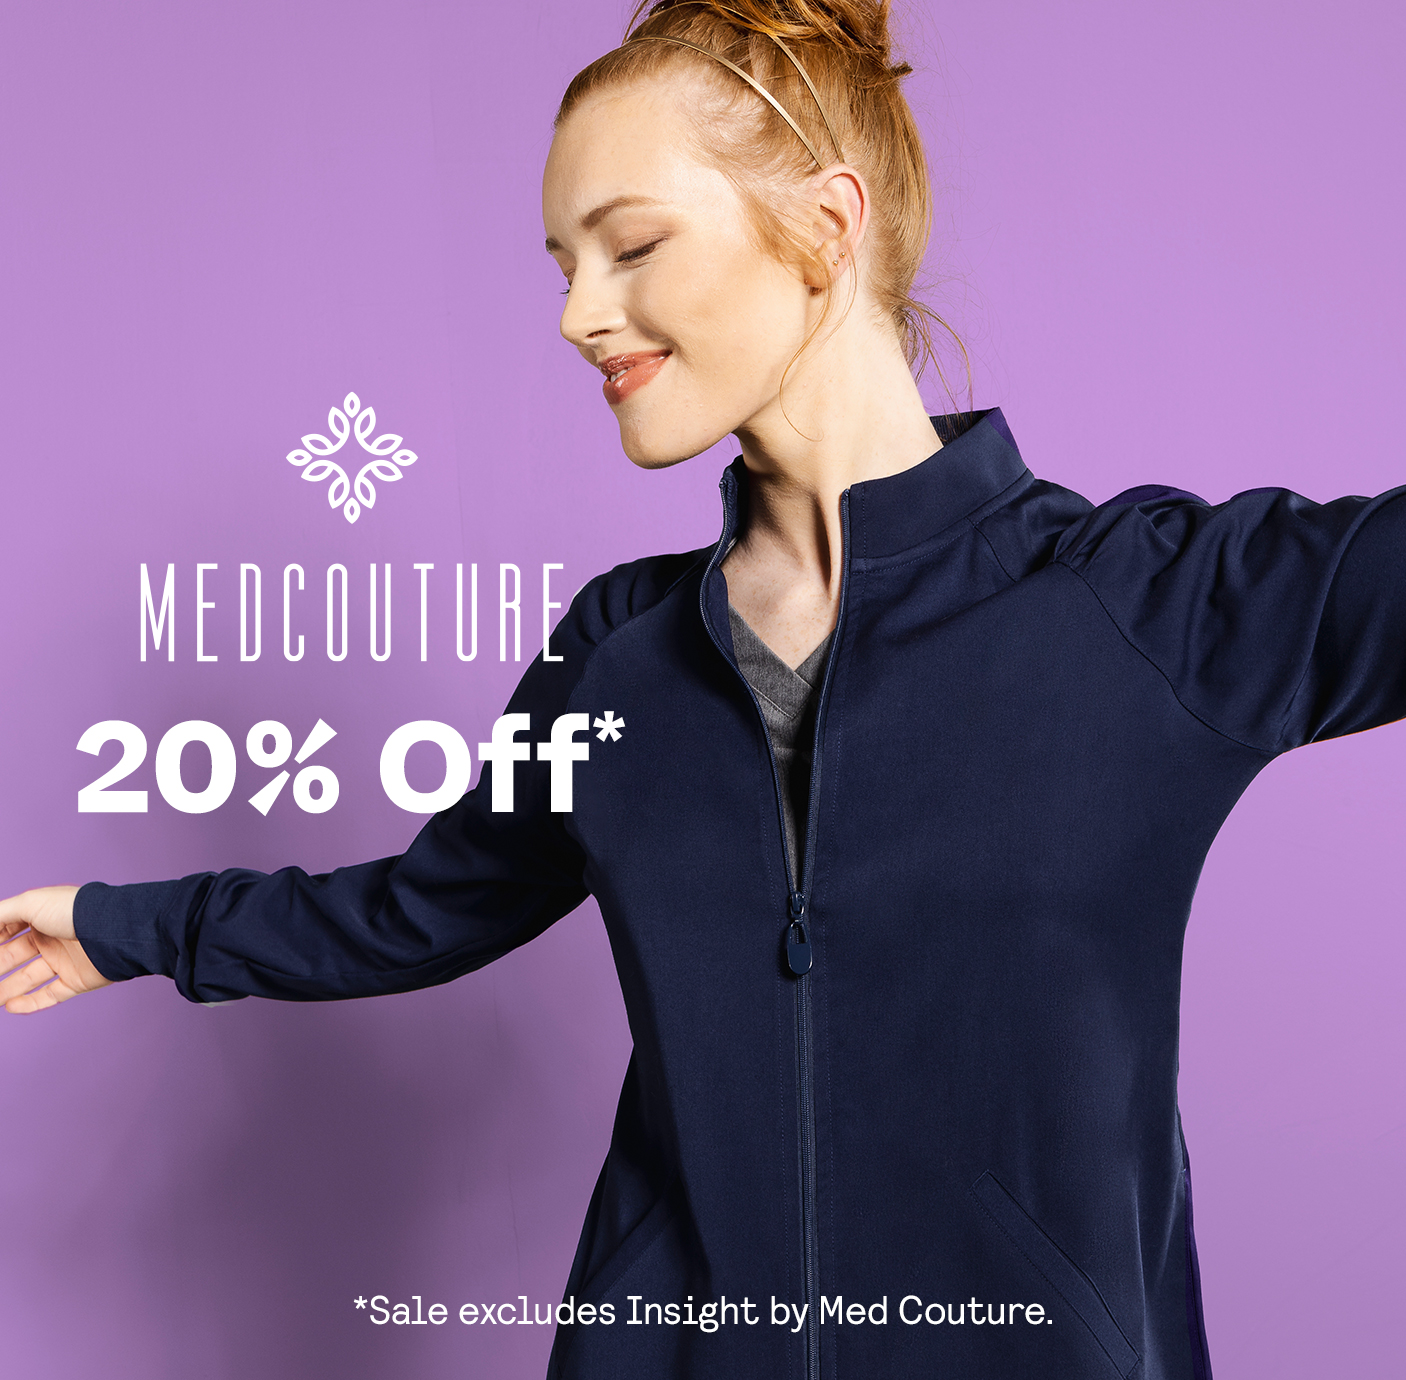 MedCouture Sale 20% Off excludes Insight